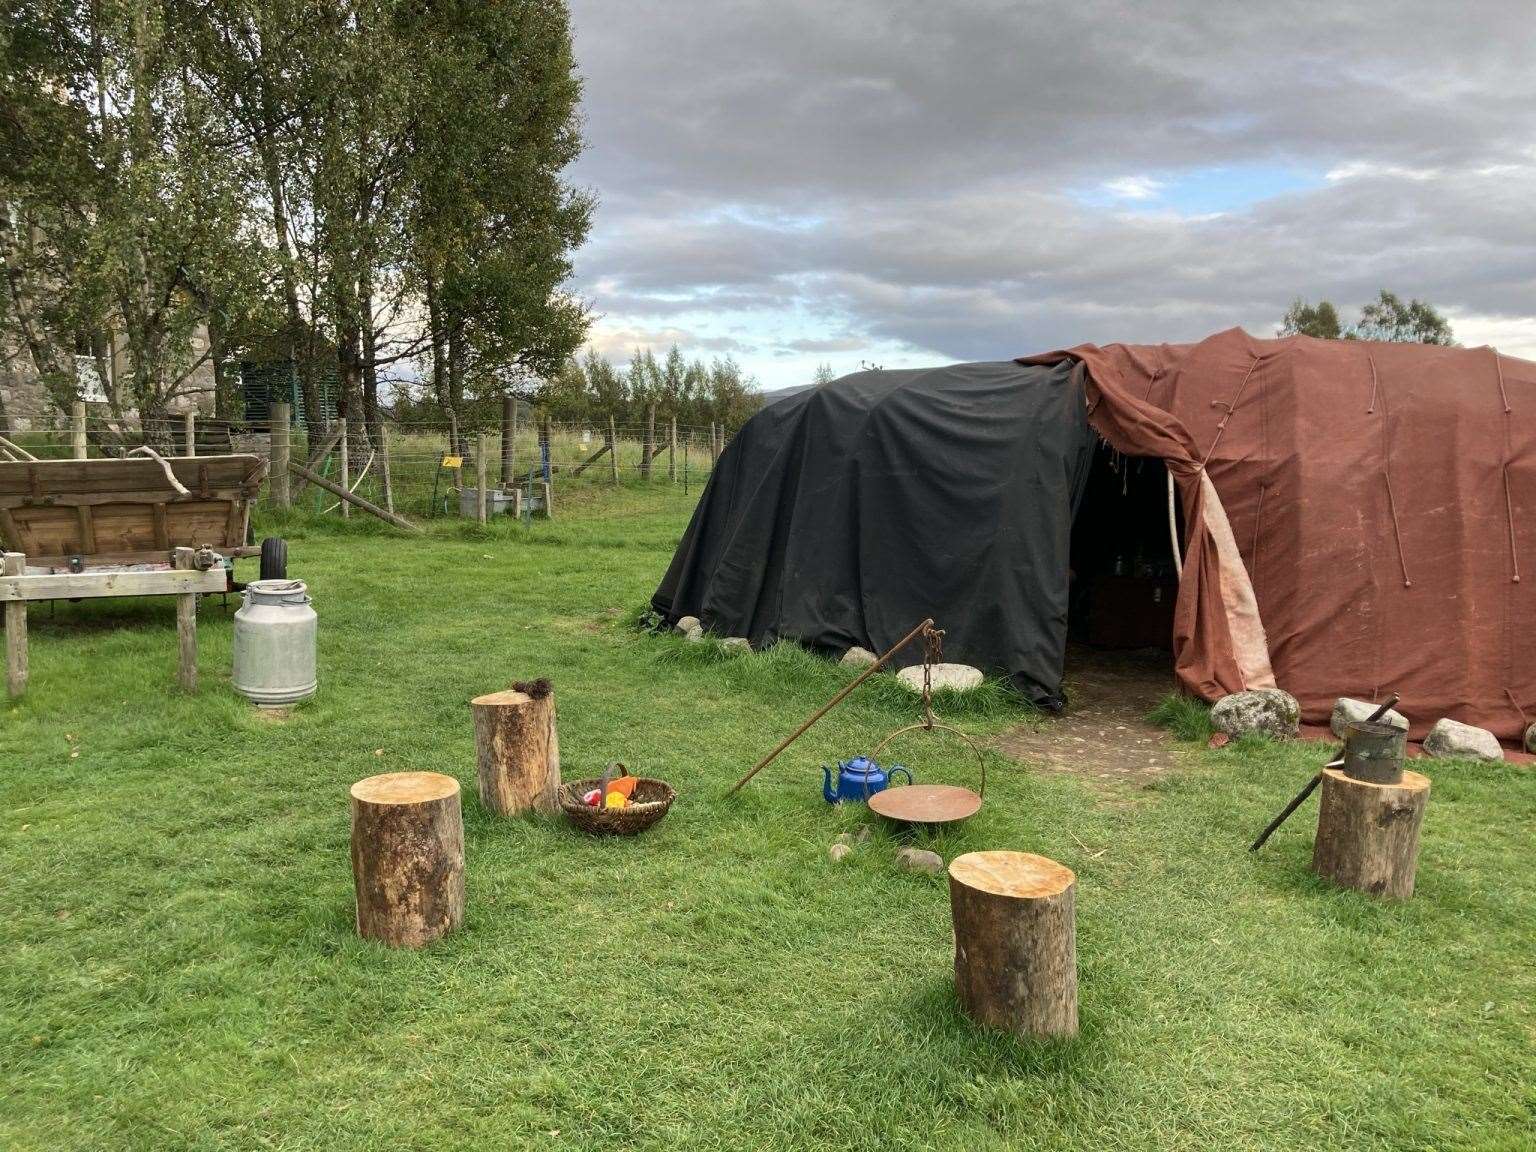 The Sutherland travellers' encampment was first introduced to the Highland Folk Museum in 2018.